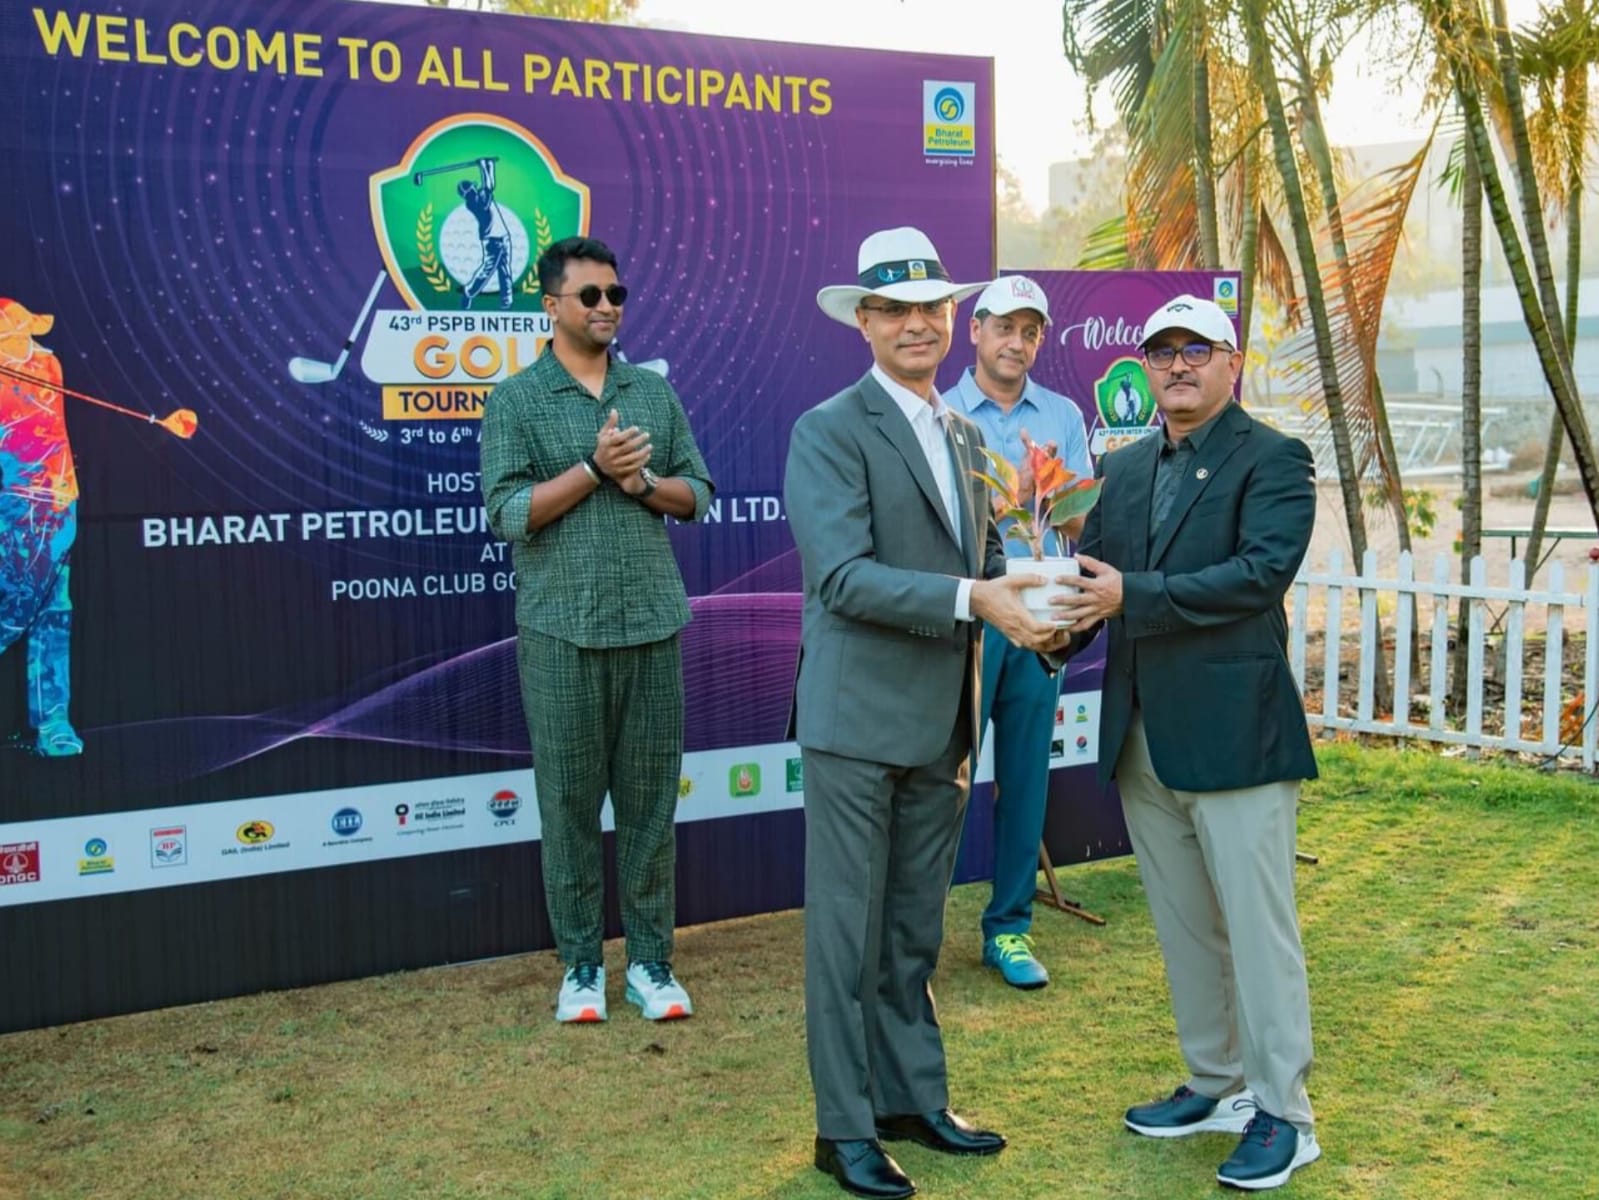 43rd Annual PSPB Inter-Unit Golf Tournament at Poona Club Golf Course